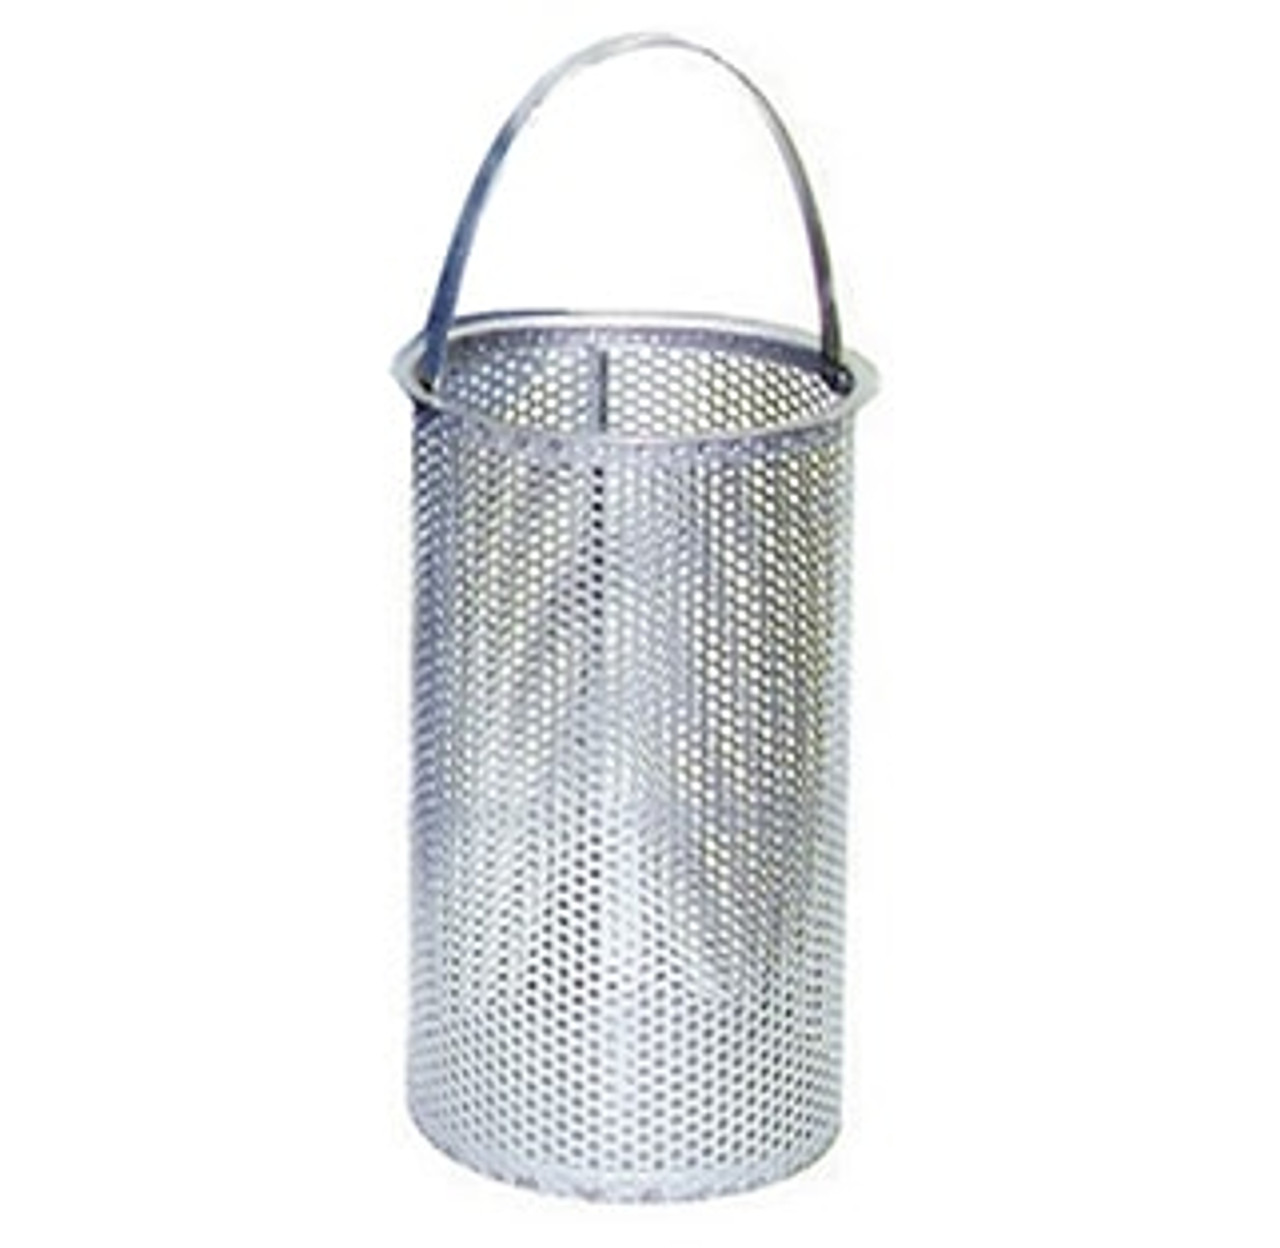 100 Mesh Replacement Basket for Eaton Model 72 Strainer Size 2"